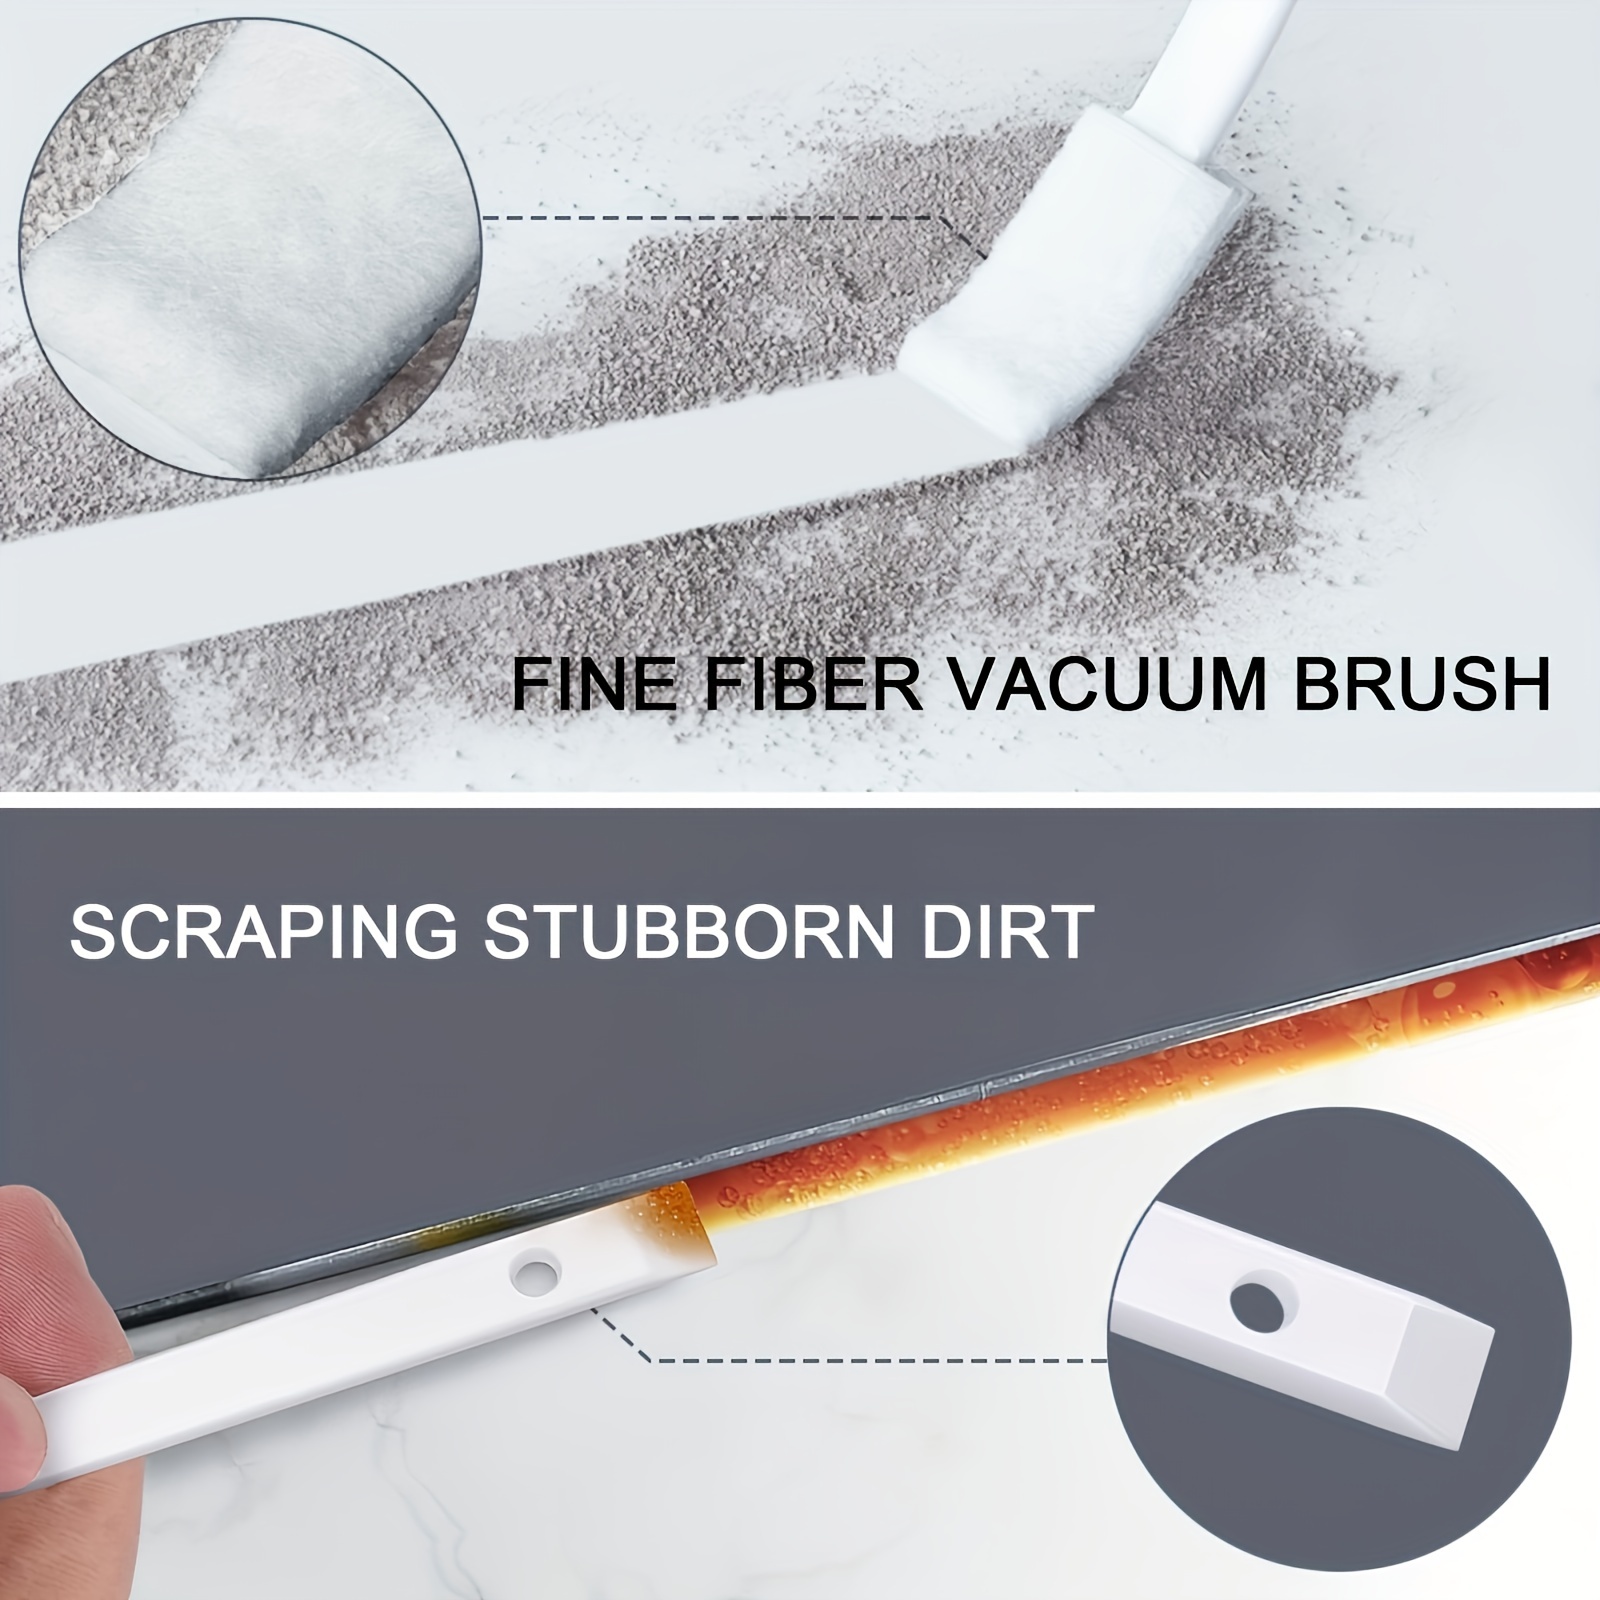 Crevice Cleaning Brushes Tool kit Small Brush Disposable Toilet Brush Deep  Cleaning Brush Shower Nozzle Anti-Clogging Pore Gap for Gap Corner of Stove